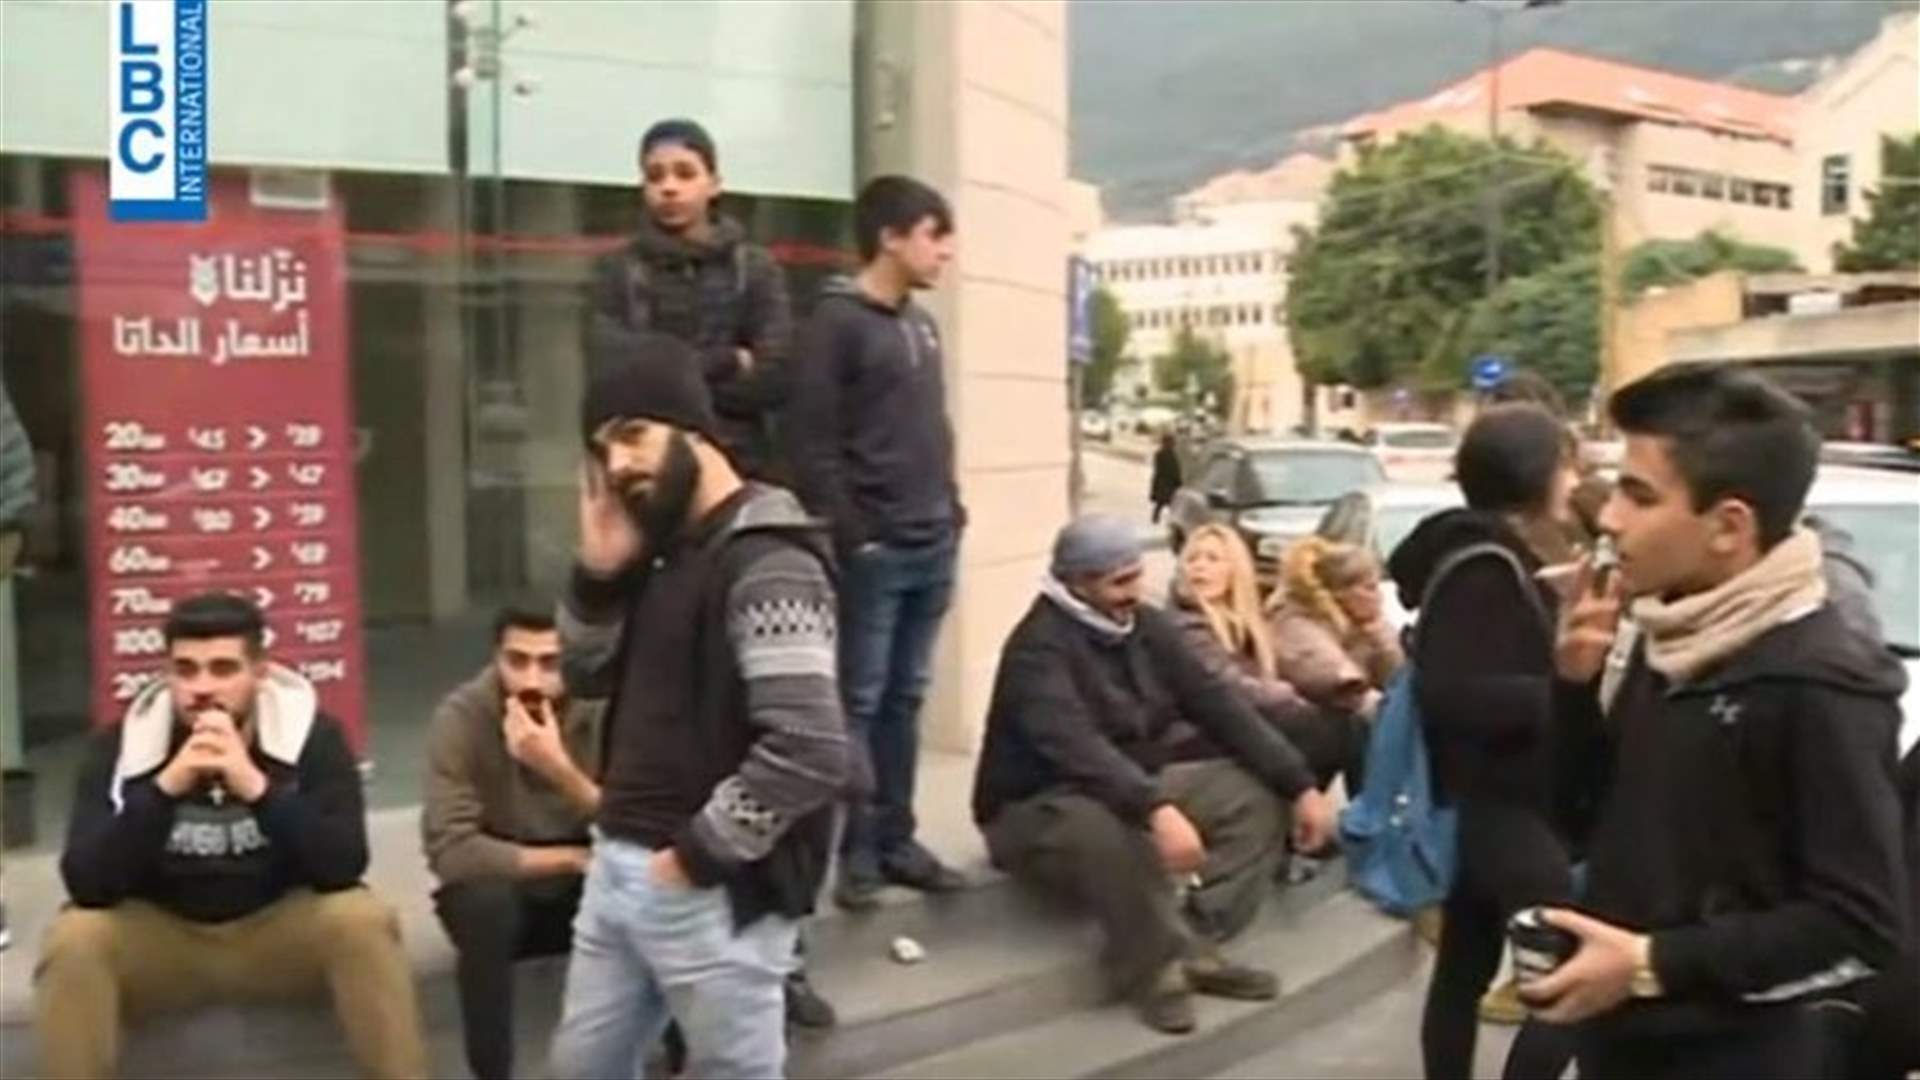 Protesters hold sit-in outside Alfa store in Jounieh-[VIDEO]